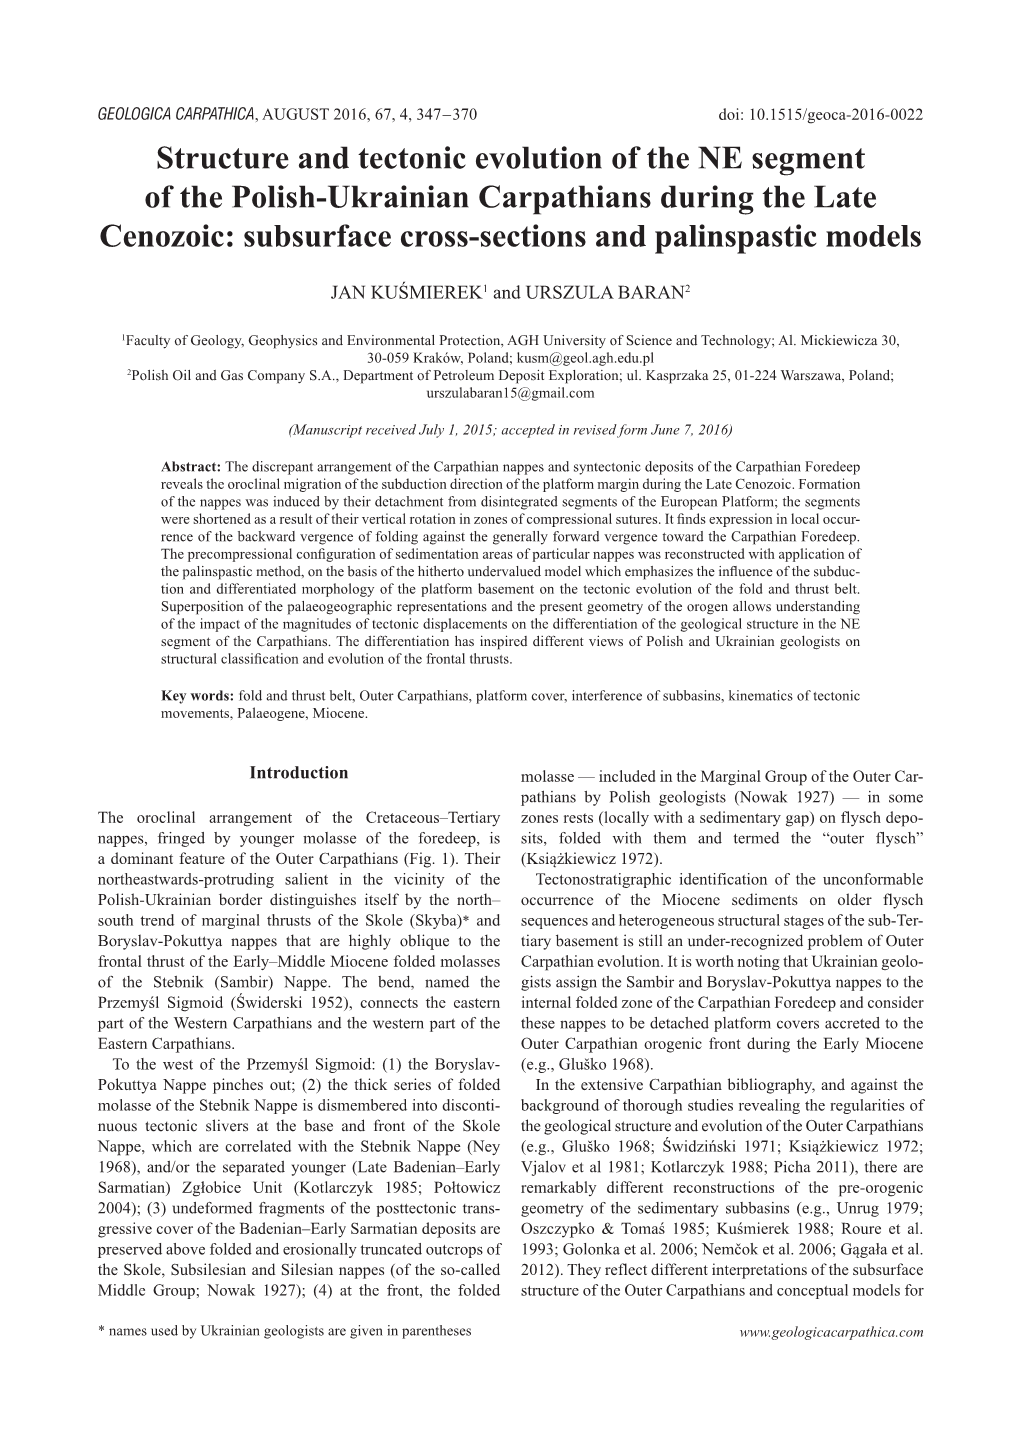 Structure and Tectonic Evolution of the NE Segment of the Polish-Ukrainian Carpathians During the Late Cenozoic: Subsurface Cross-Sections and Palinspastic Models